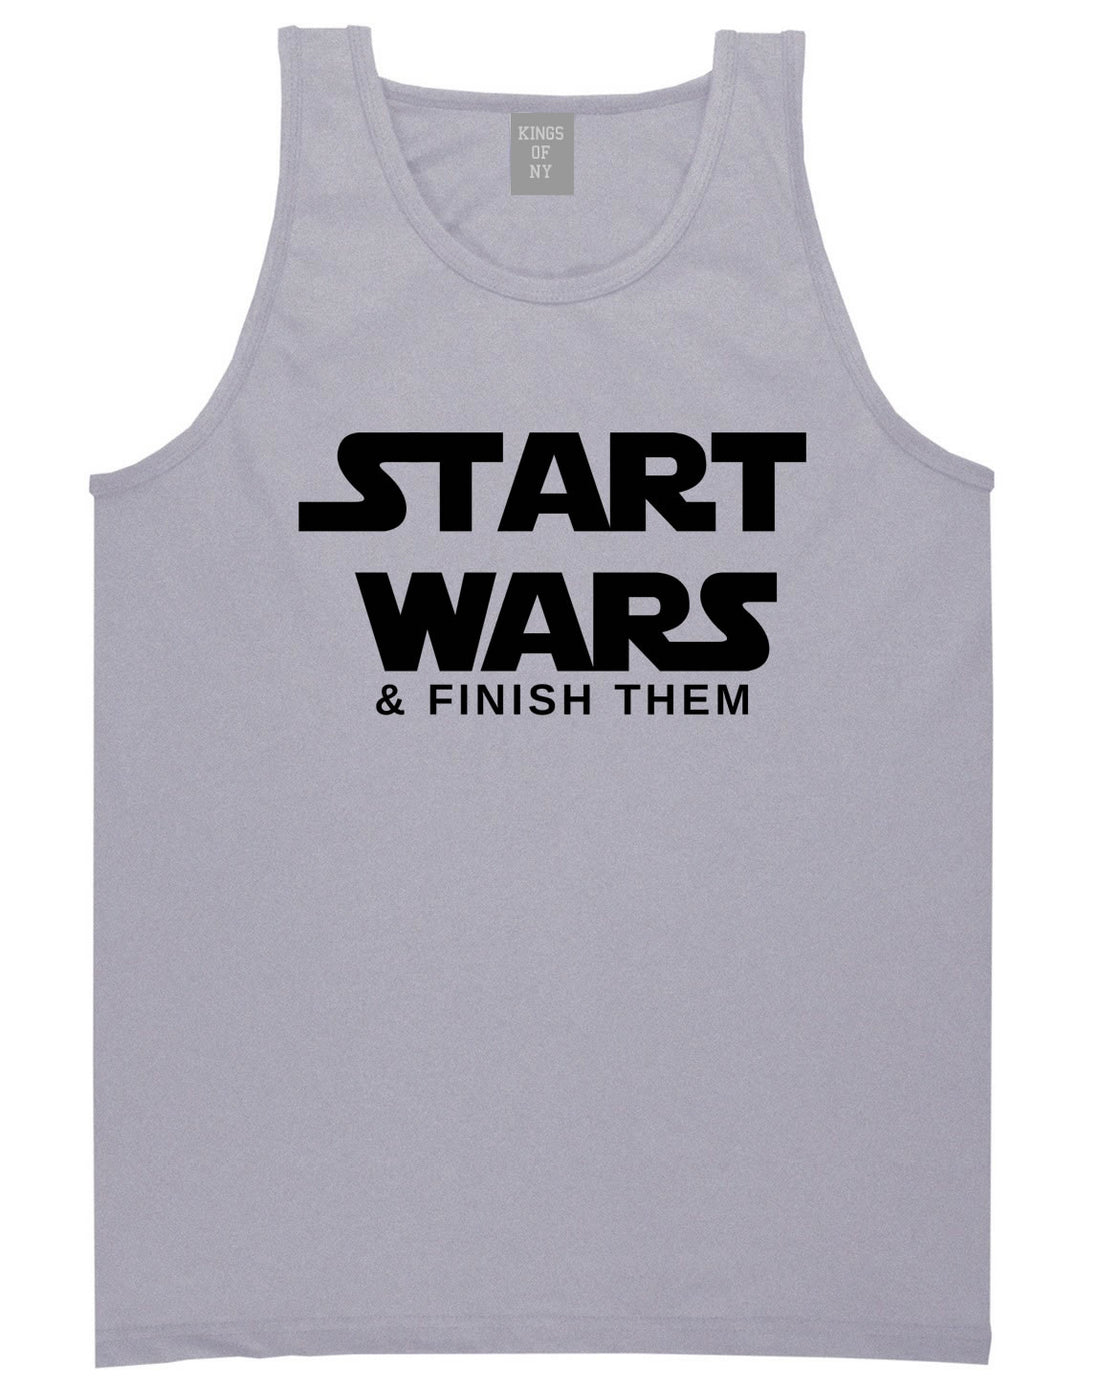 Start Wars Tank Top By Kings Of NY